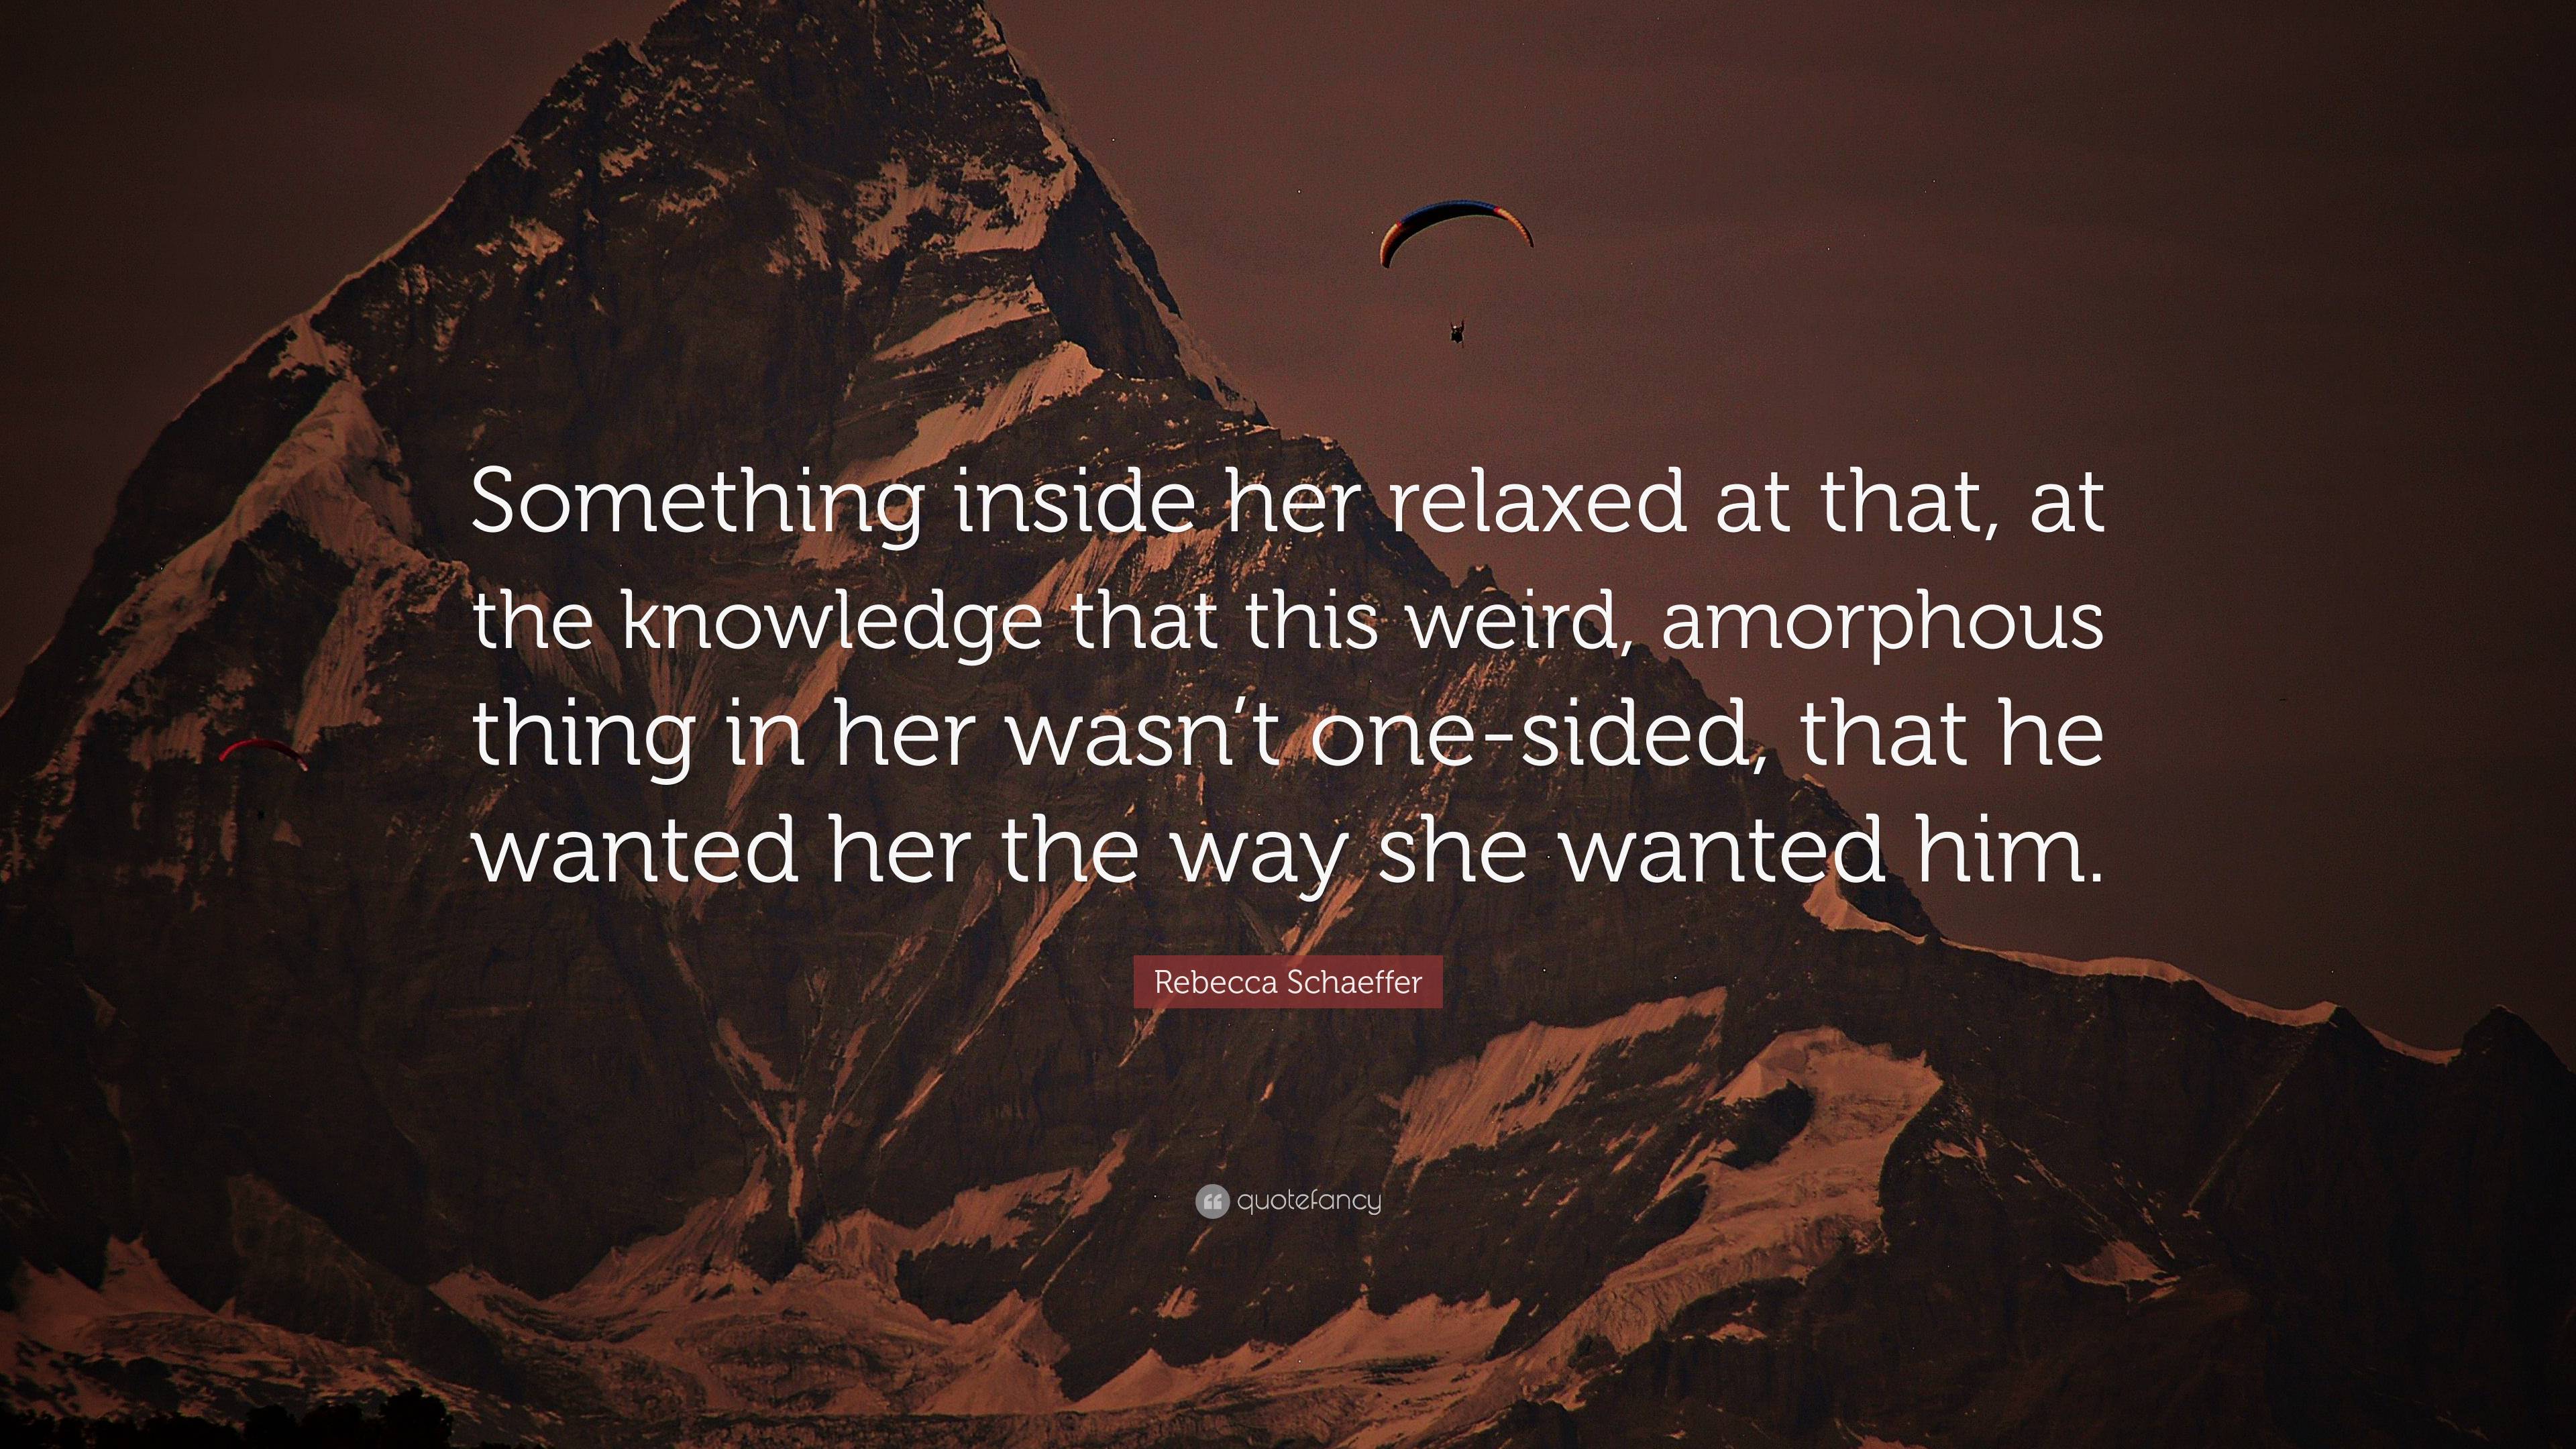 Rebecca Schaeffer Quote: “Something inside her relaxed at that, at the ...